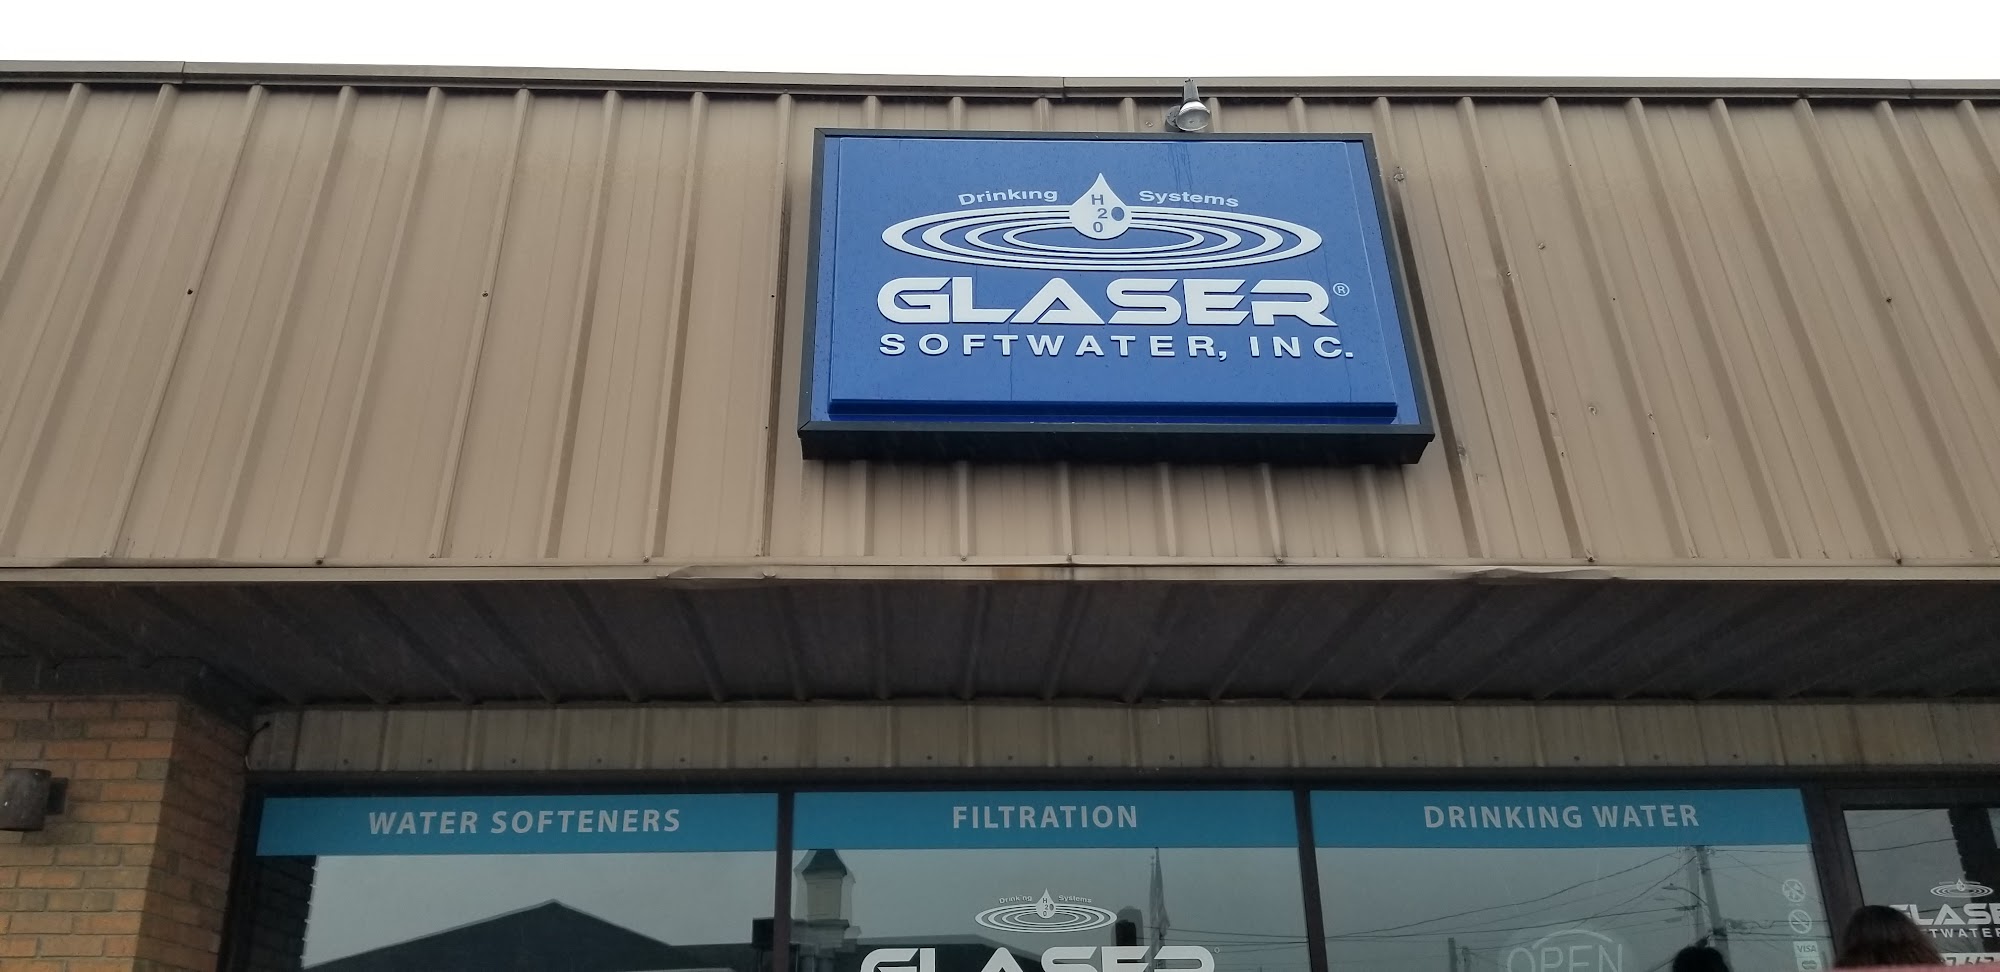 GLASER SOFTWATER North Plaza Shopping Center, 939 W Main St, Tipp City Ohio 45371